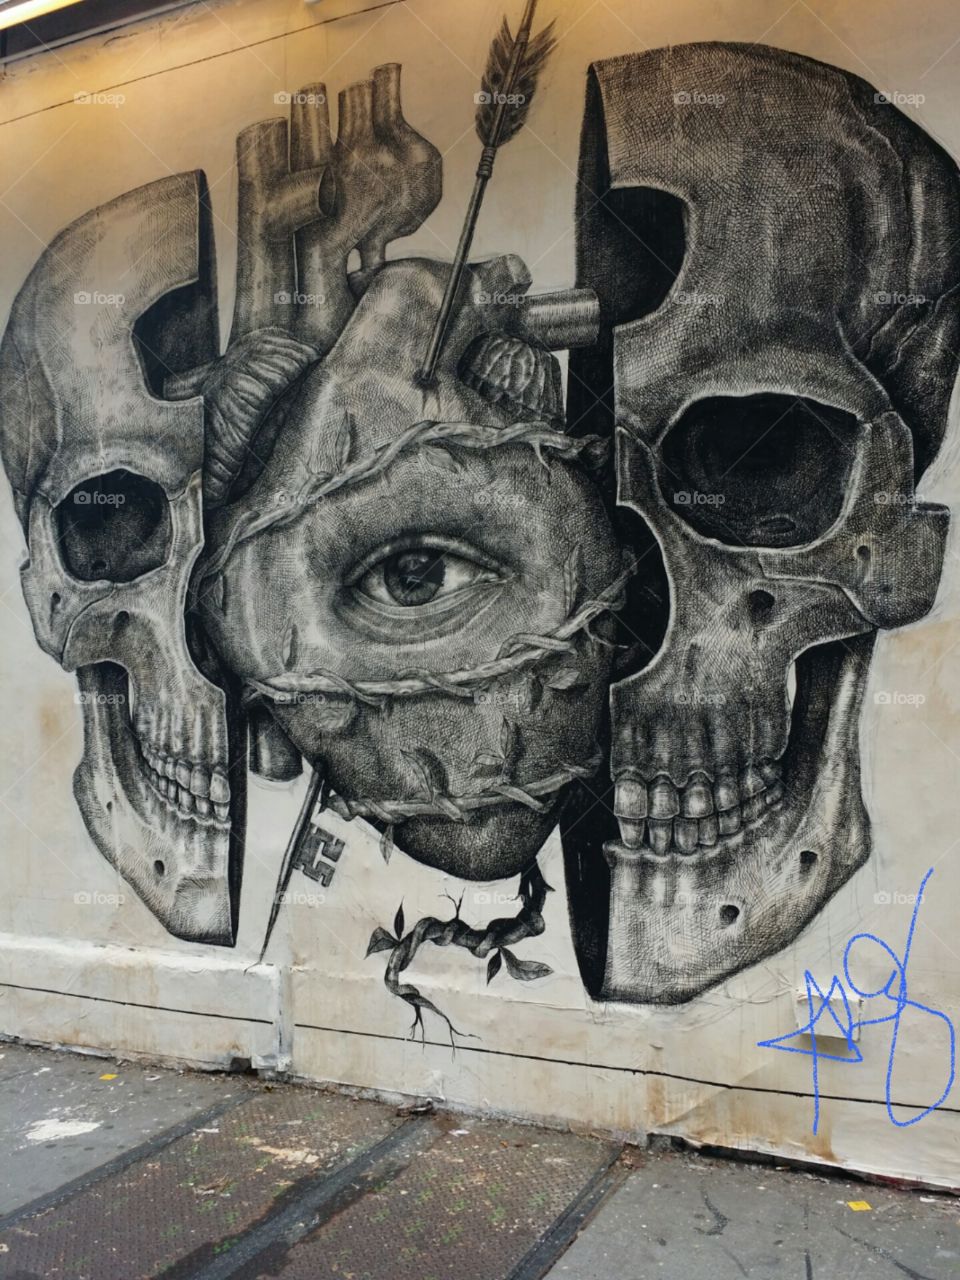 Skull Face NYC. NYC in NOHO/ SOHO walking by little boutiques